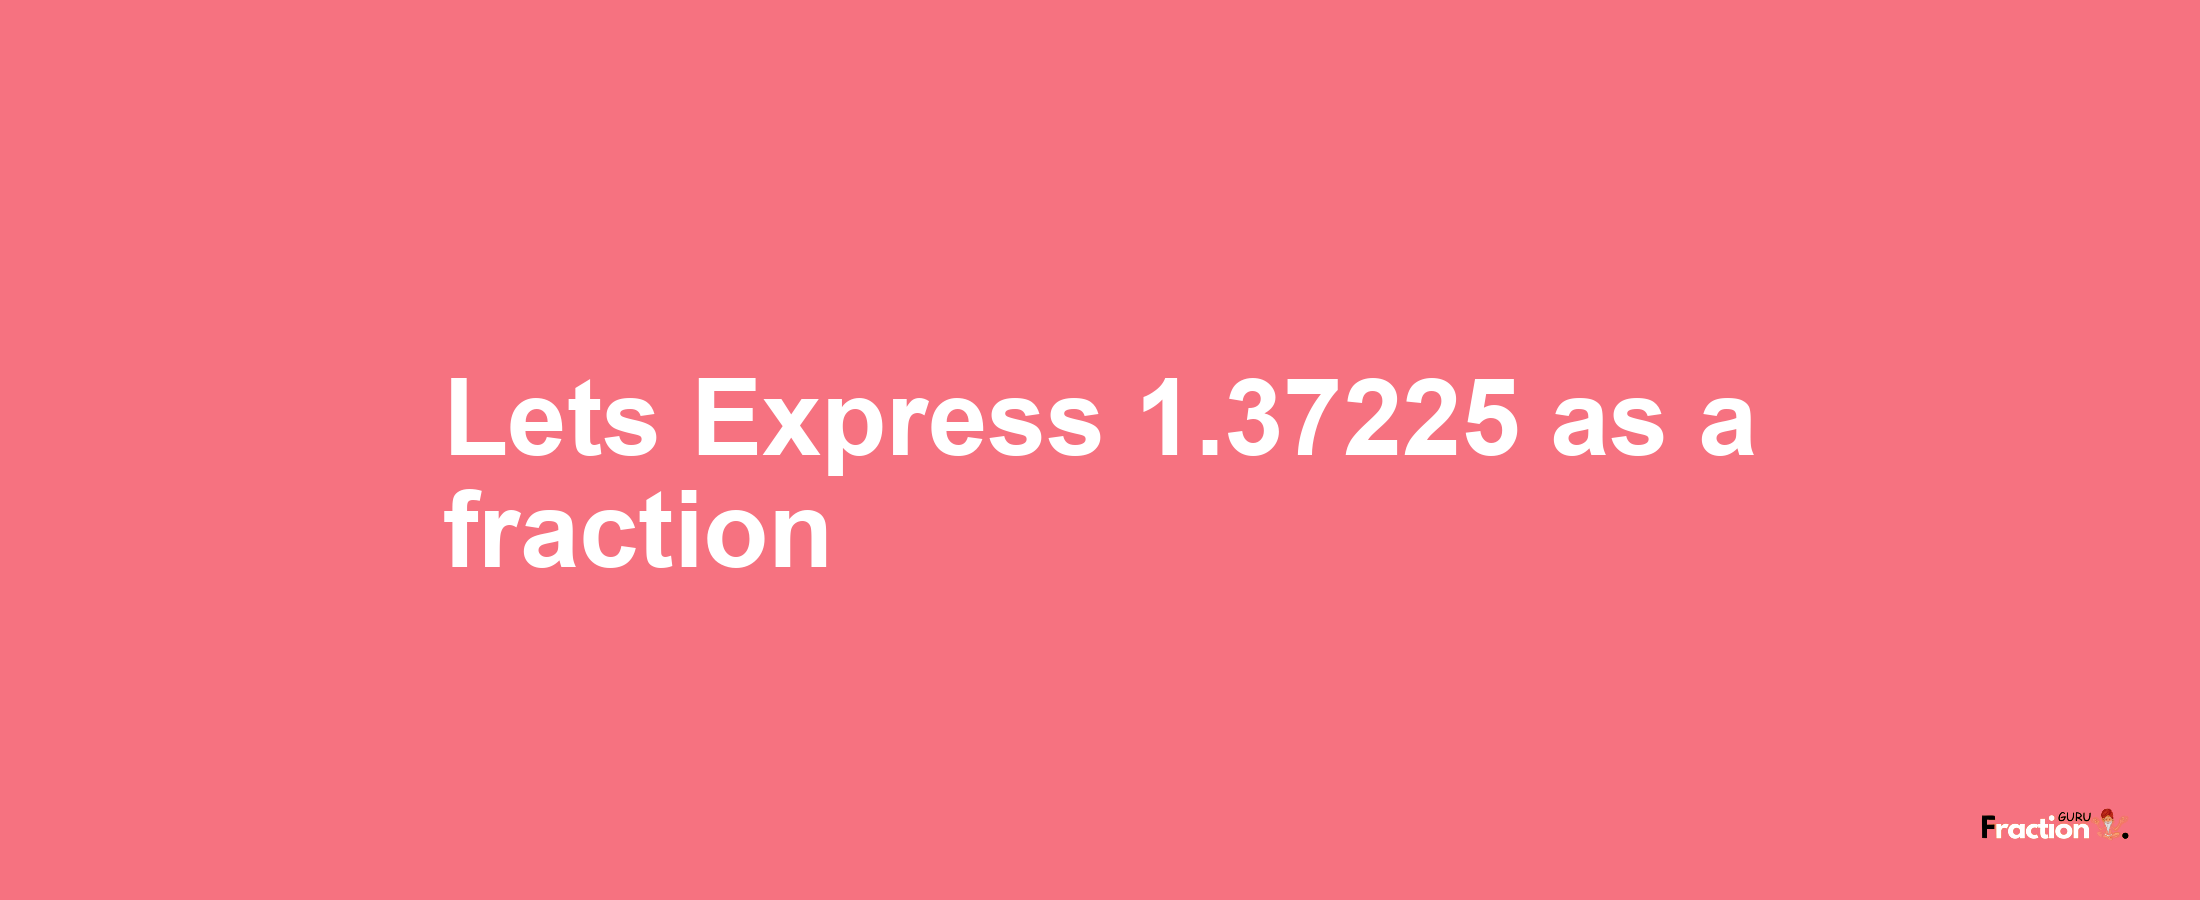 Lets Express 1.37225 as afraction